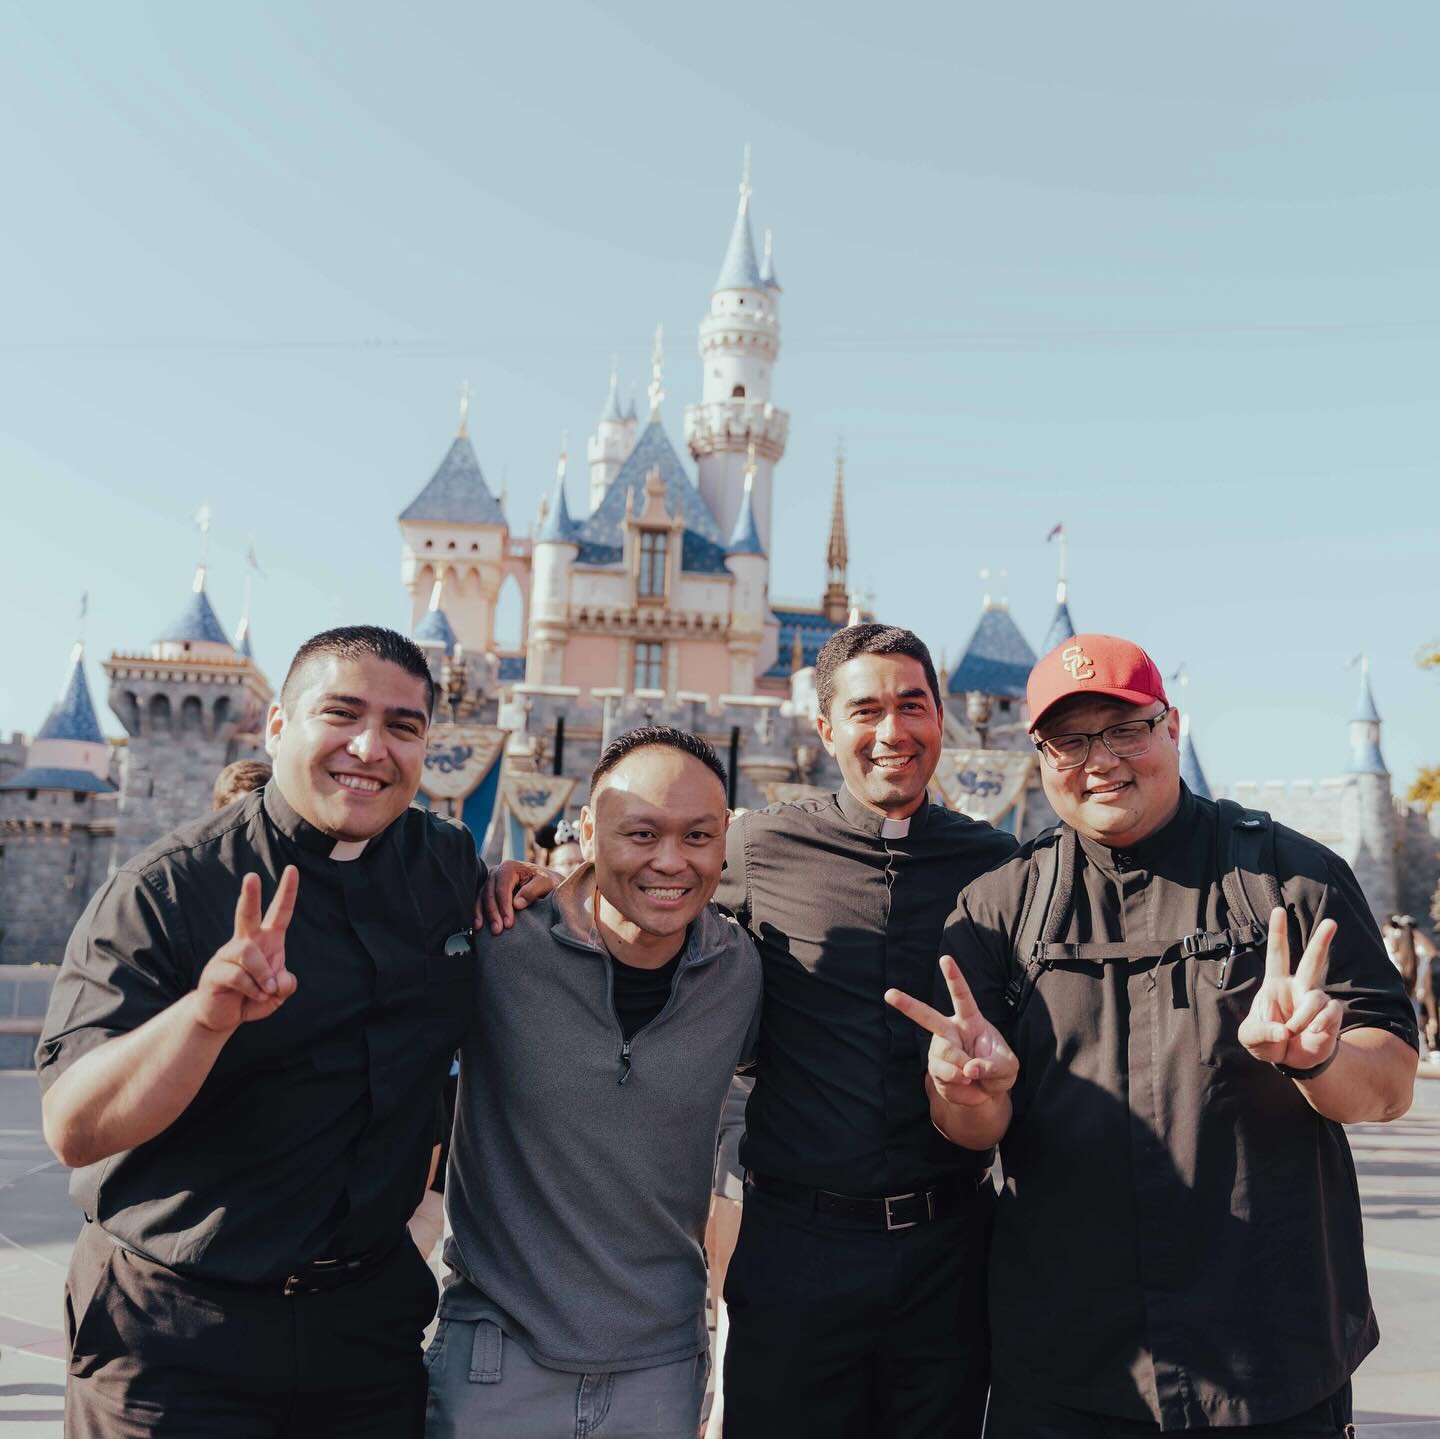 We took a little study break from finals and ended up at Disneyland! 
&mdash;
We are praying for all of our students that they may finish out the year strong! St Joseph of Cupertino, pray for us🙏 #trojancatholic